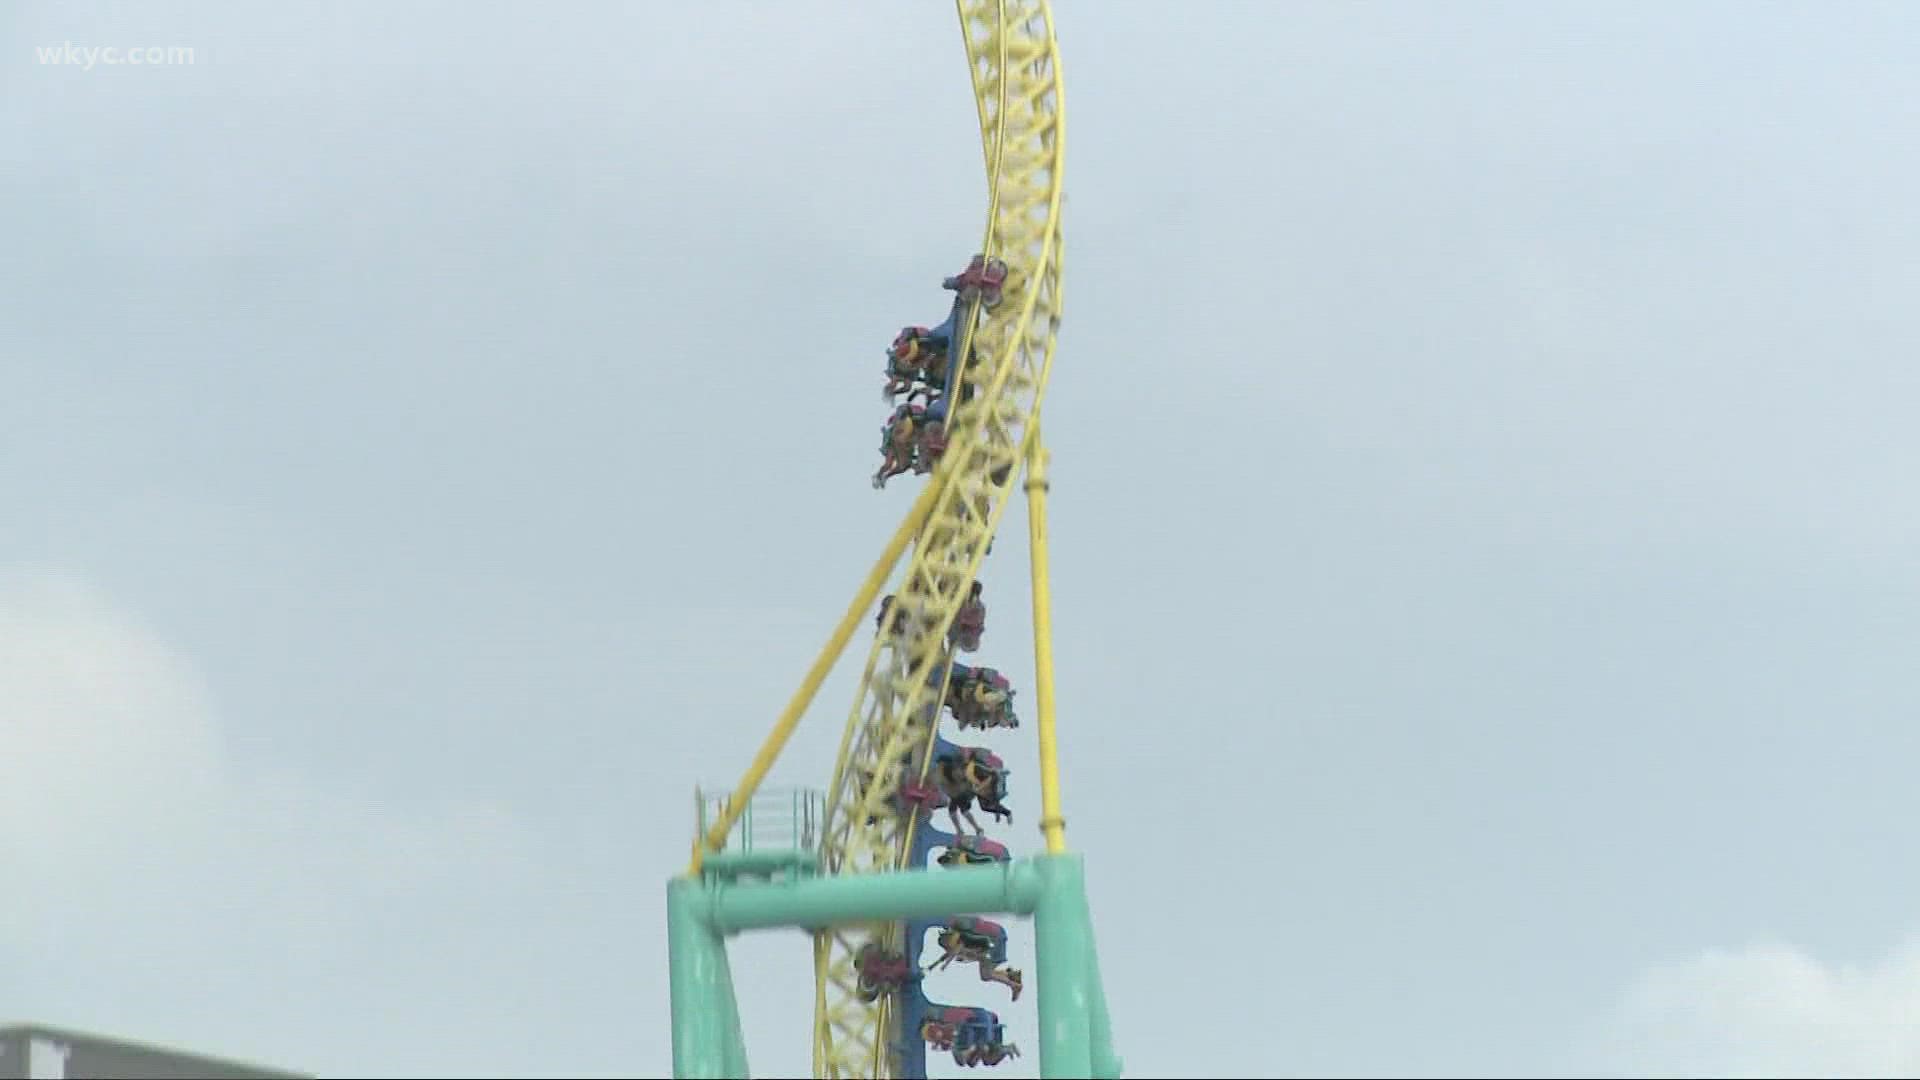 Monday is the final day for the ride. Wicked Twister has given more than 16 million rides since debuting in 2002.